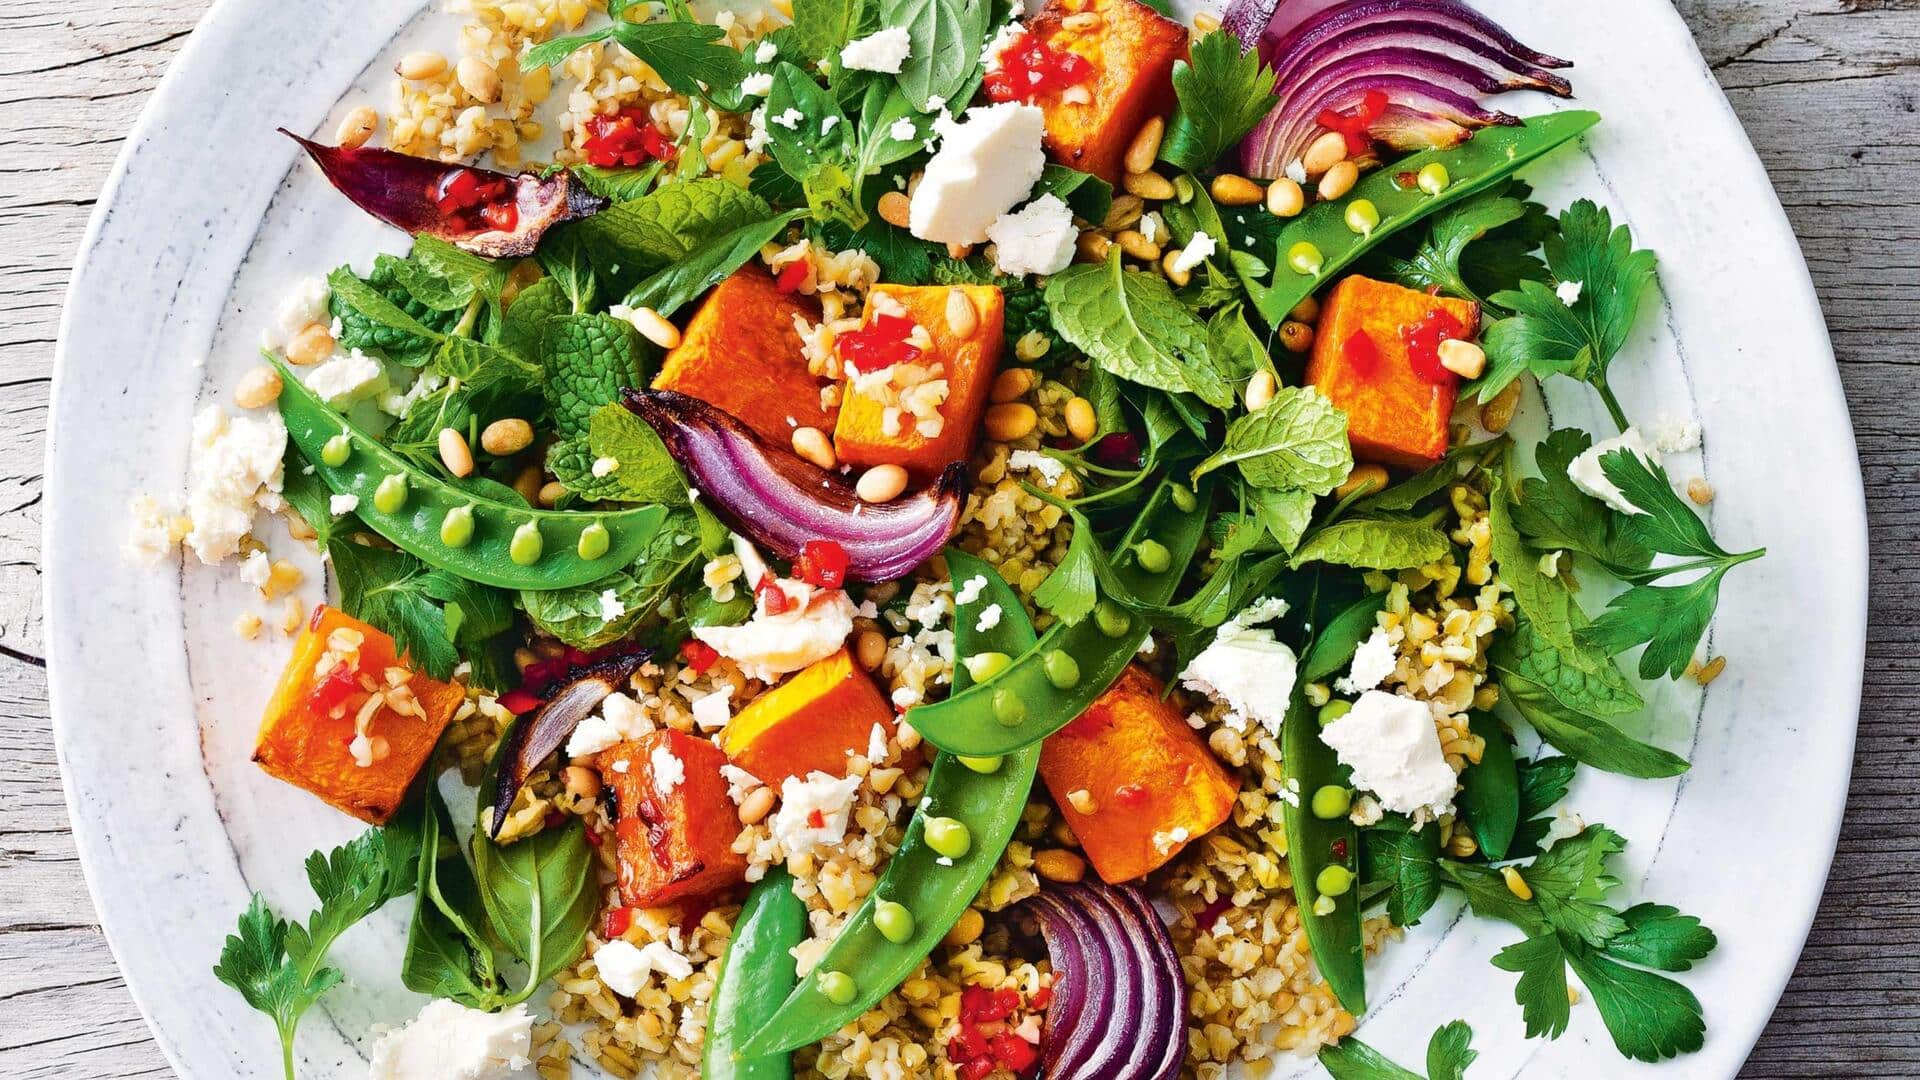 Try this freekeh salad recipe for a healthy day